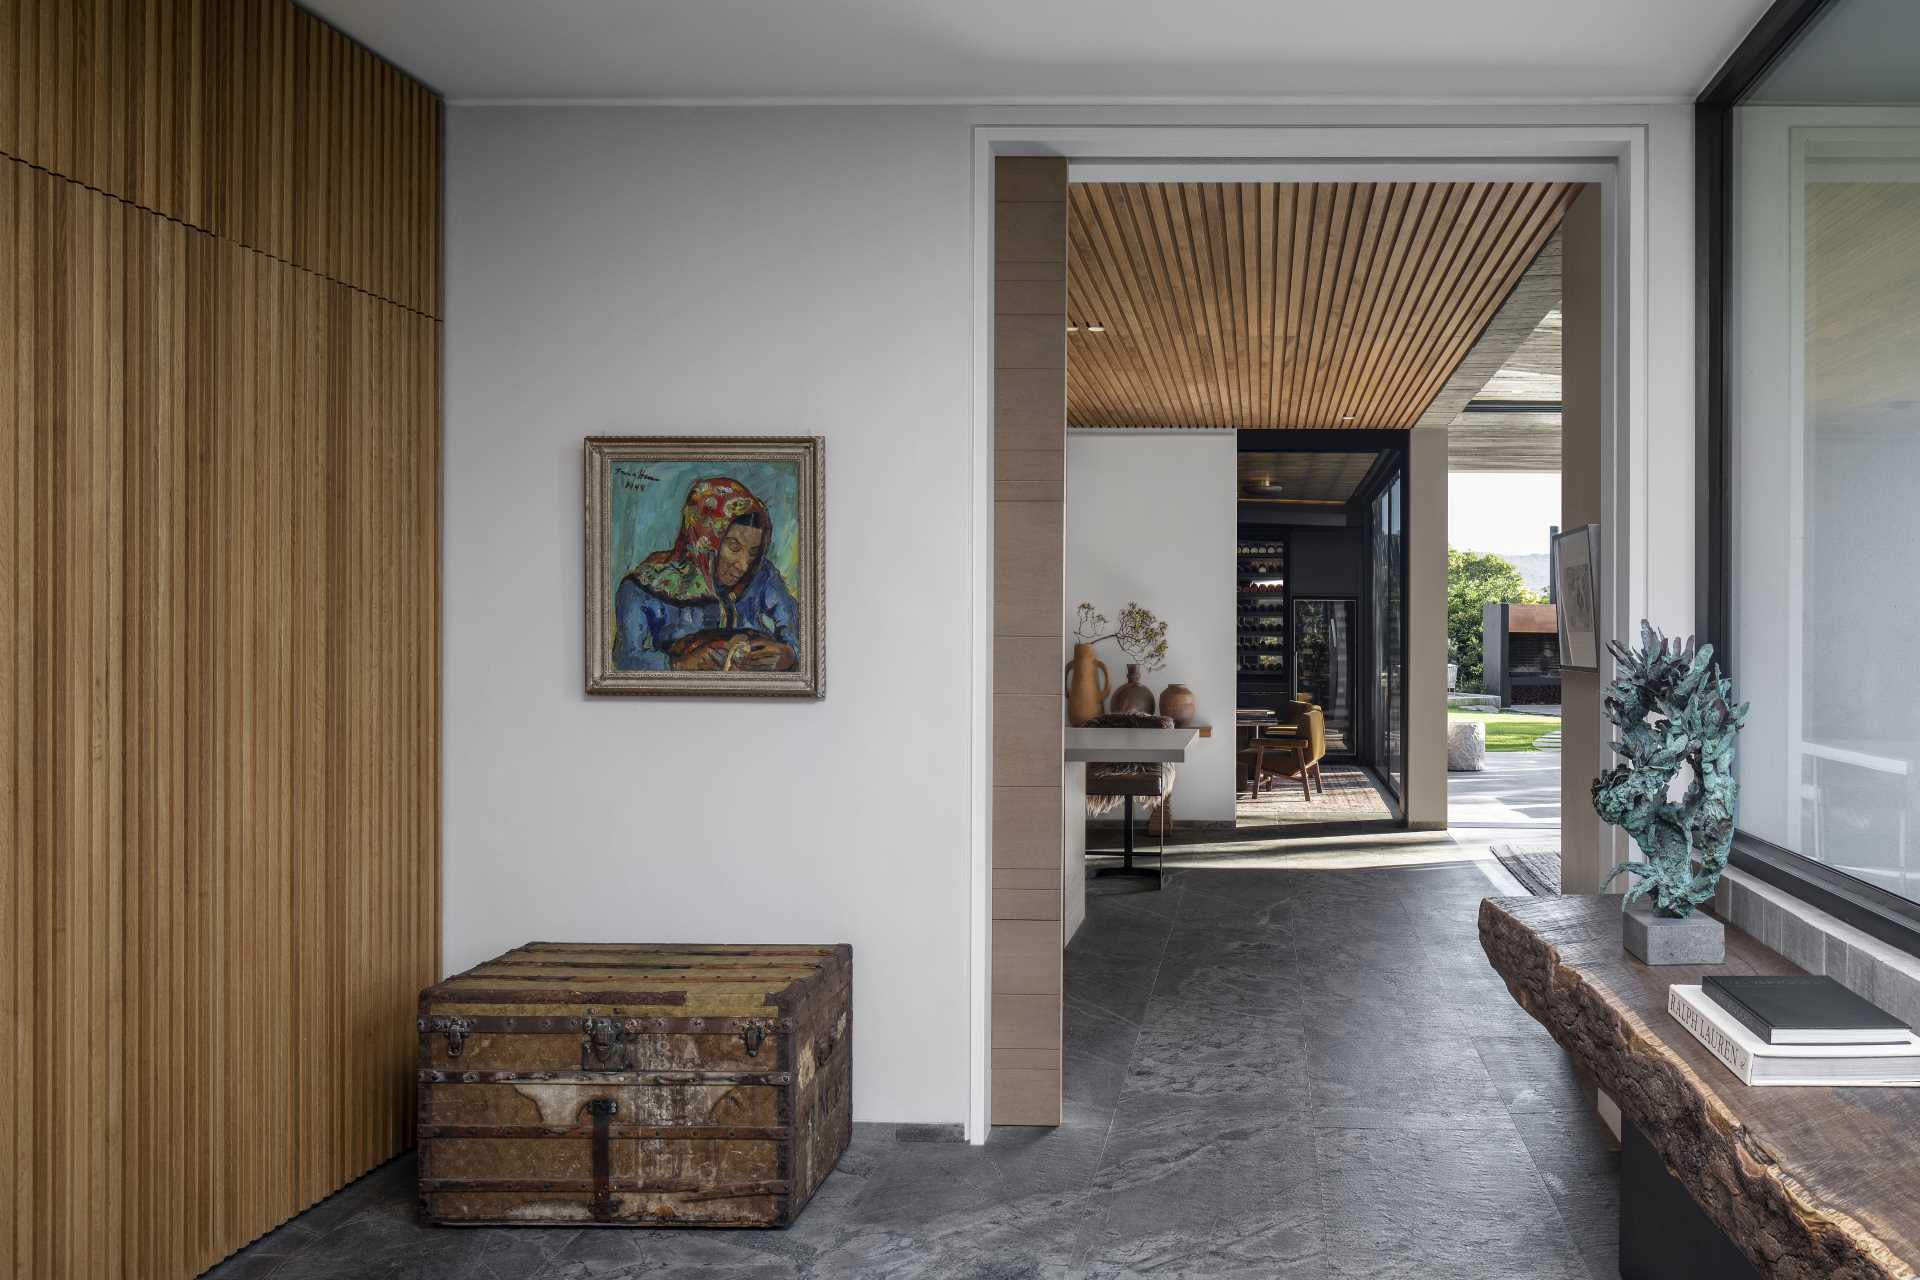 Stepping inside this modern home, the entryway features a wood accent wall that complements the wood ceiling that can be seen in the kitchen.